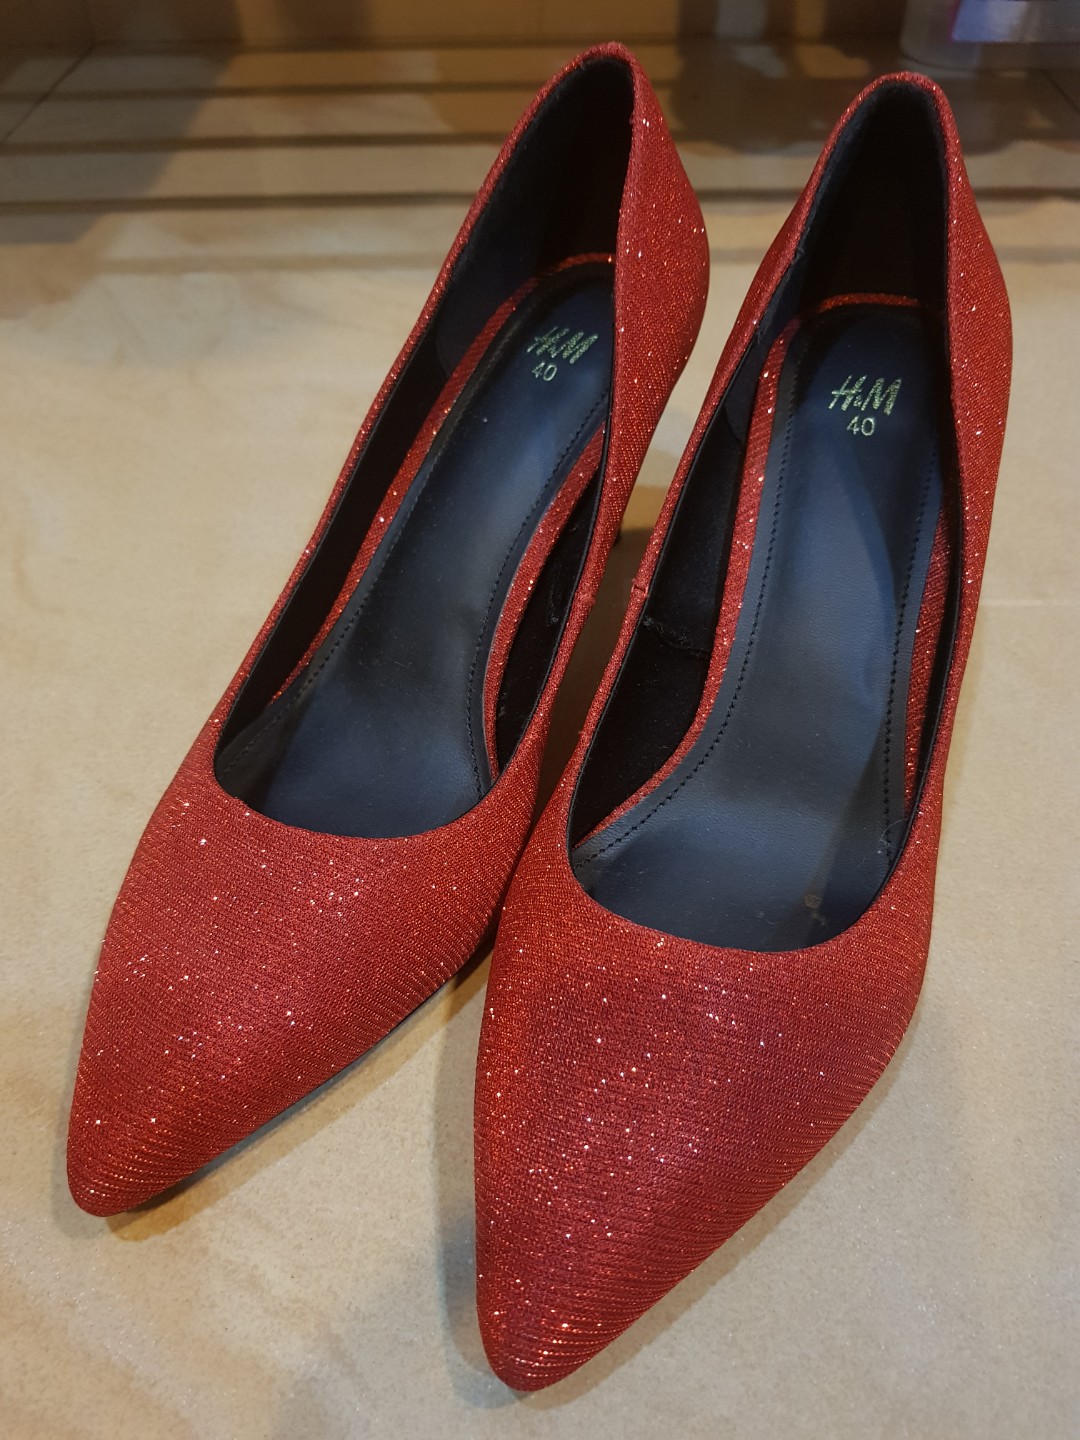 red sparkly high heels